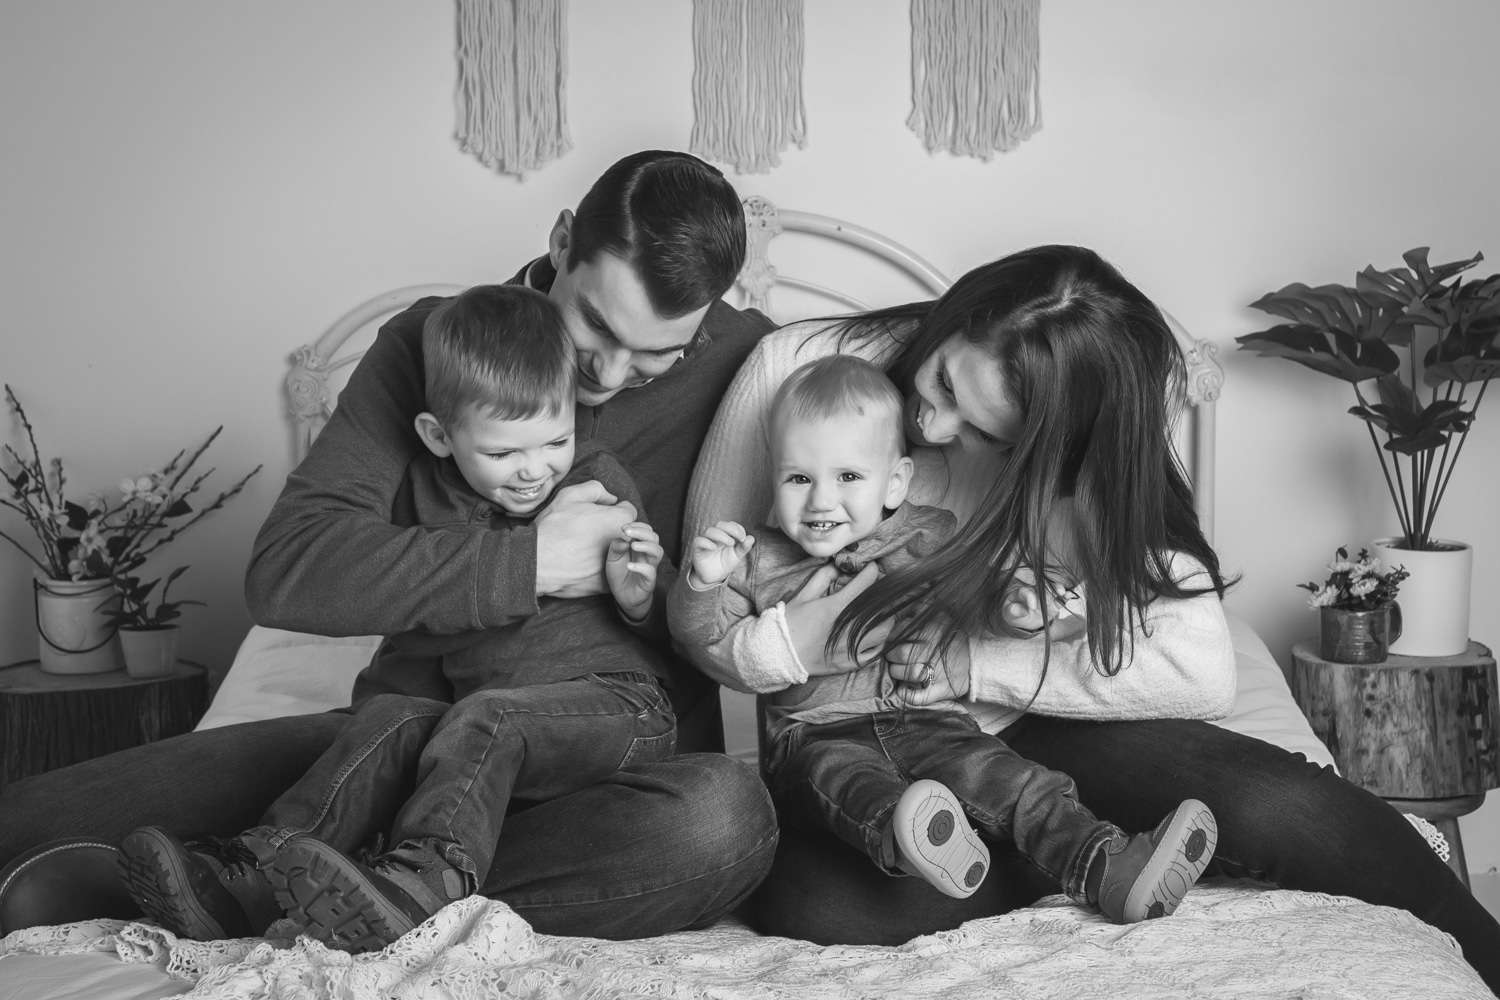 baby photographer in rochester ny captures family celebrating baby's first birthday